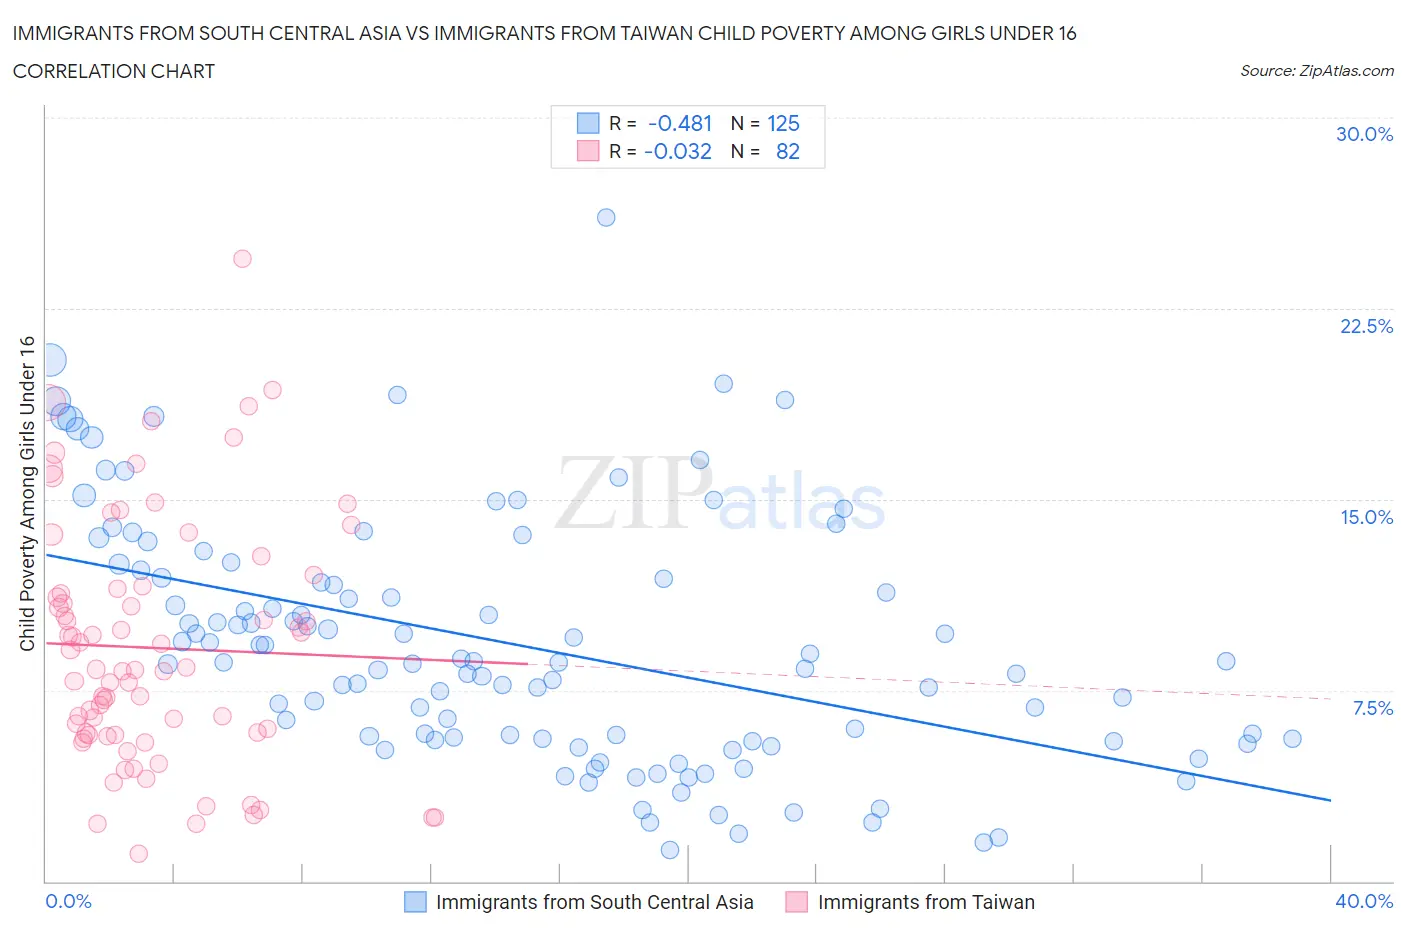 Immigrants from South Central Asia vs Immigrants from Taiwan Child Poverty Among Girls Under 16